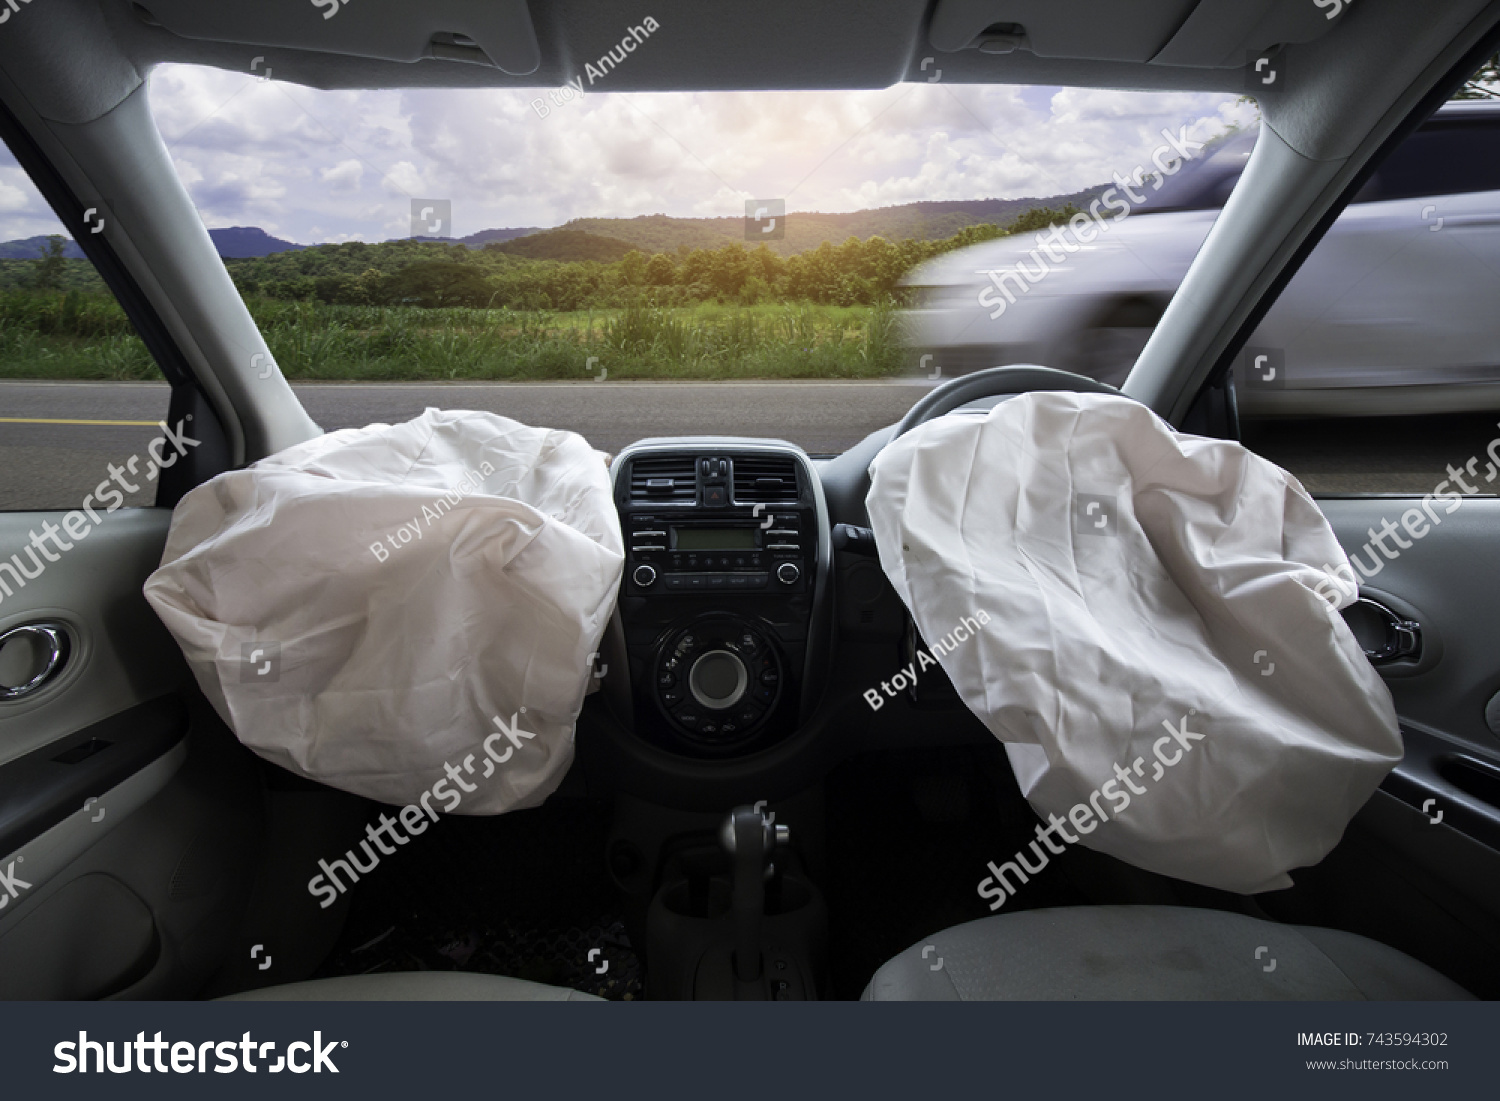 Car of accident make airbag explosion damaged at claim the insurance company. Working car repair  inspection at damaged of accident. Image with clipping path and style blur focus. #743594302